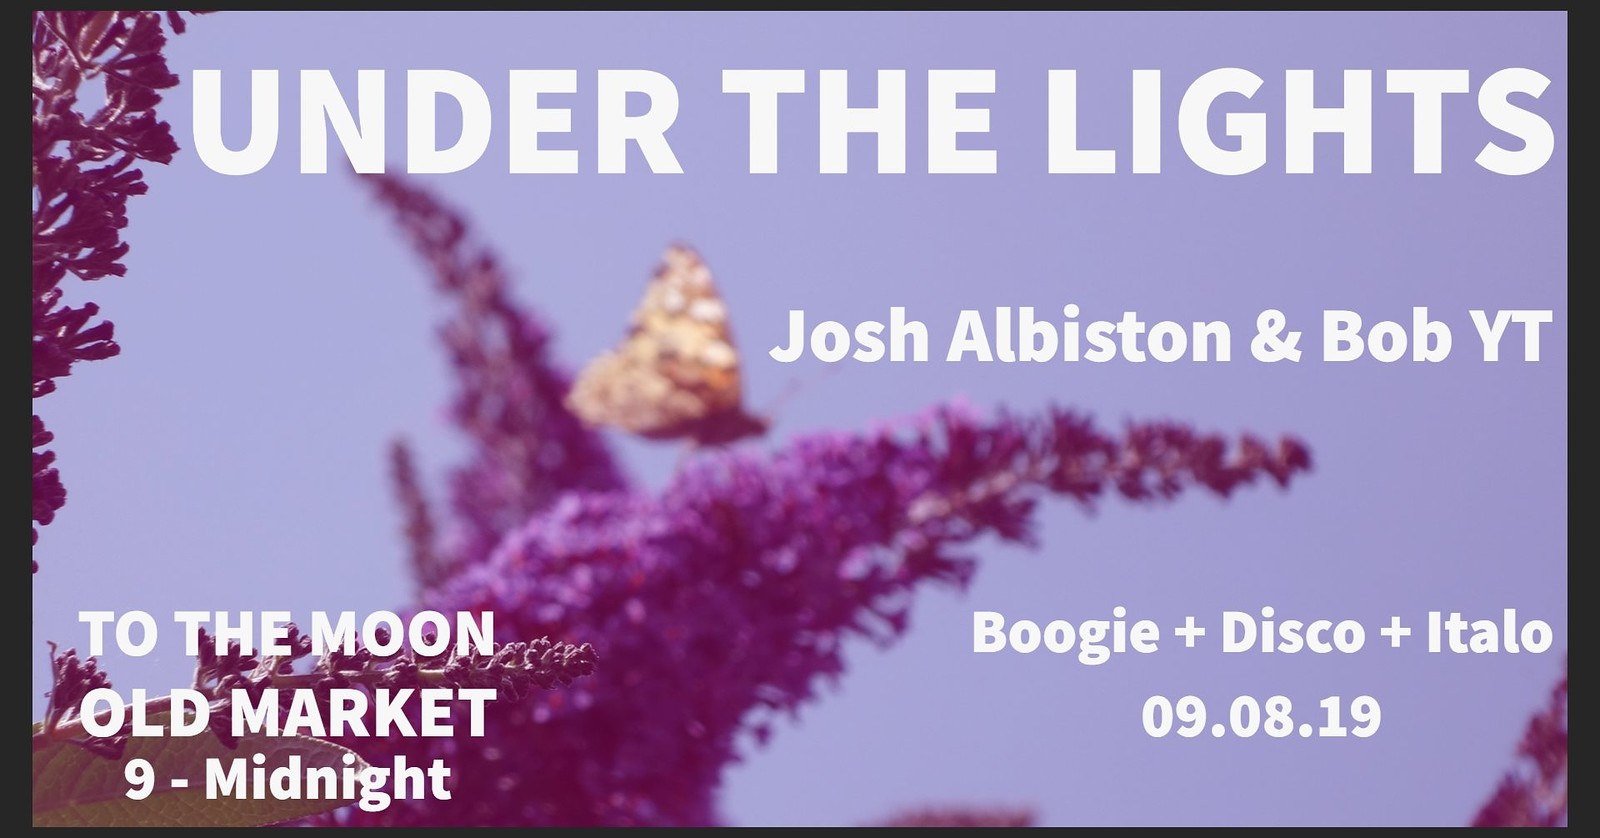 Under The Lights: Boogie - Disco - Italo at To The Moon